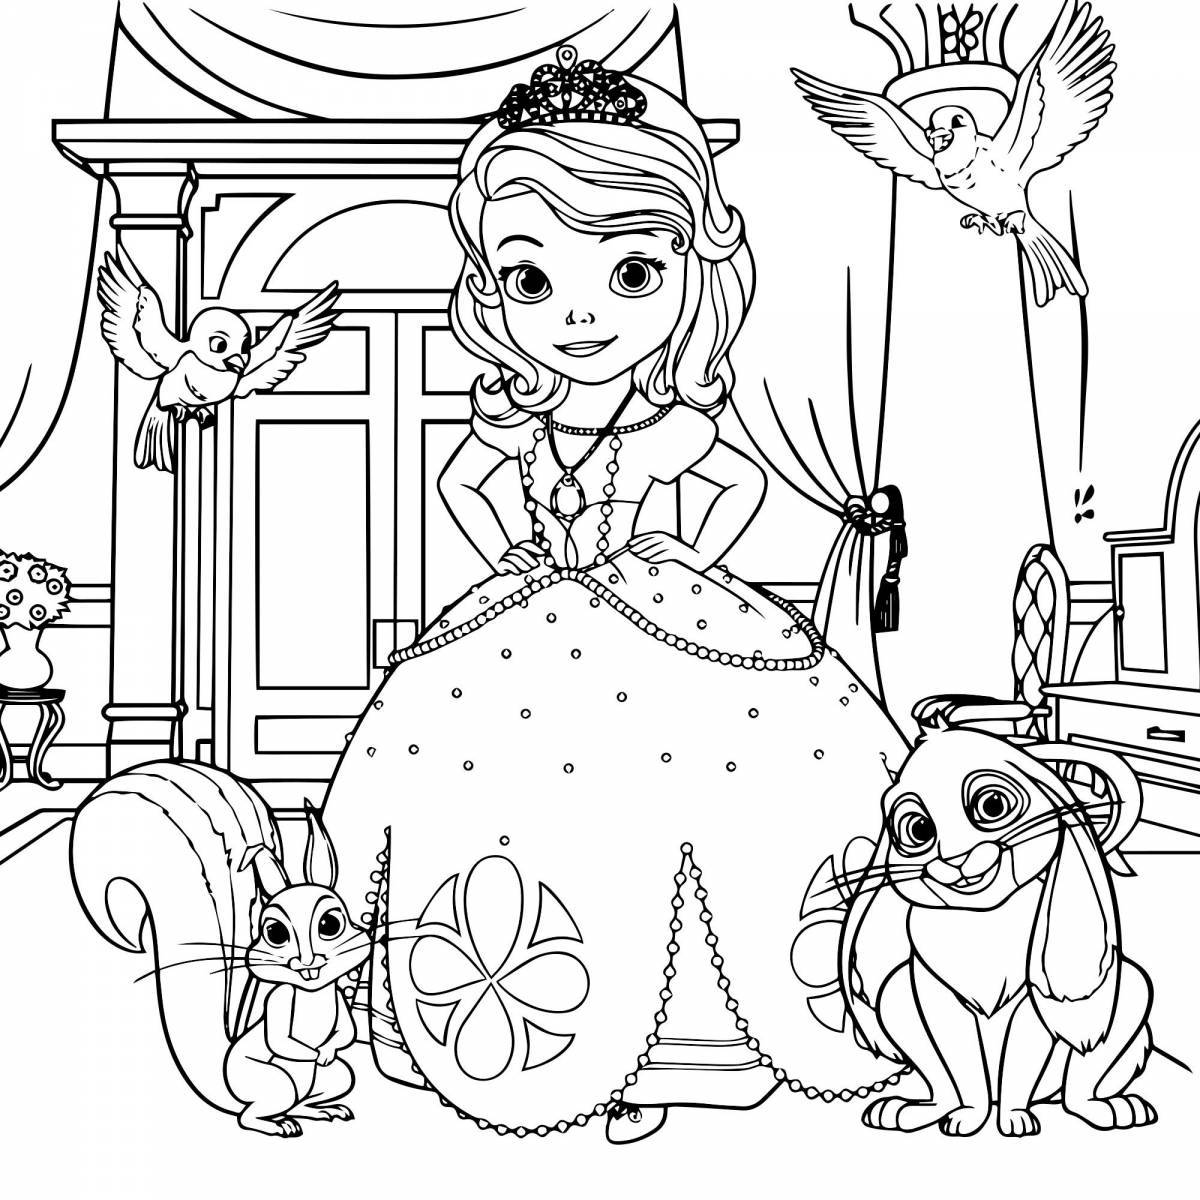 Great princess coloring book for kids 5-6 years old